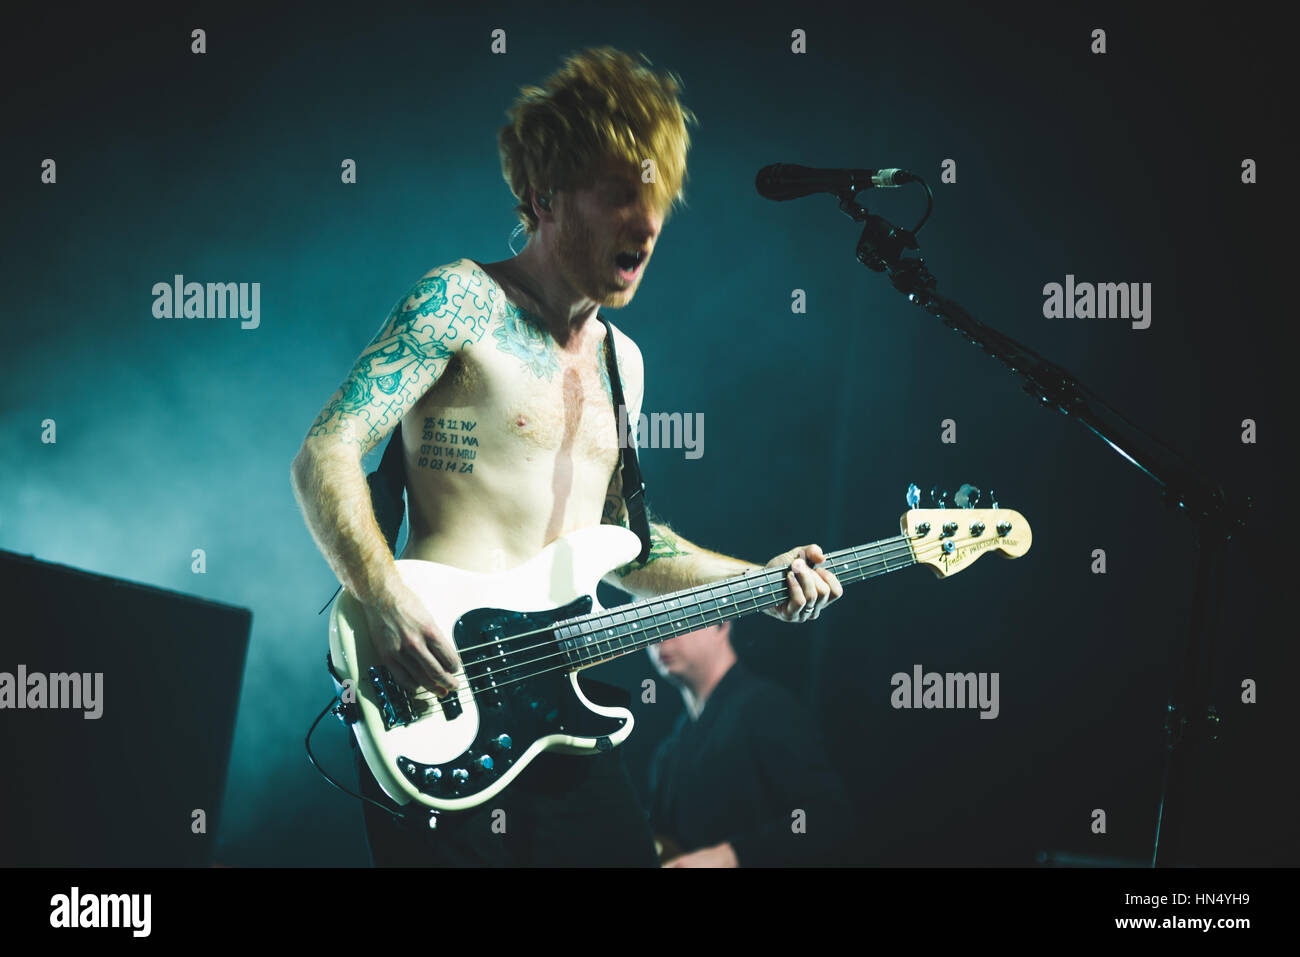 Padova, Italy. 07th Feb, 2017. Biffy Clyro performing live at Gran Teatro Geox in Padova for their 'Ellipsis' tour 2017 concert. Credit: Alessandro Bosio/Pacific Press/Alamy Live News Stock Photo